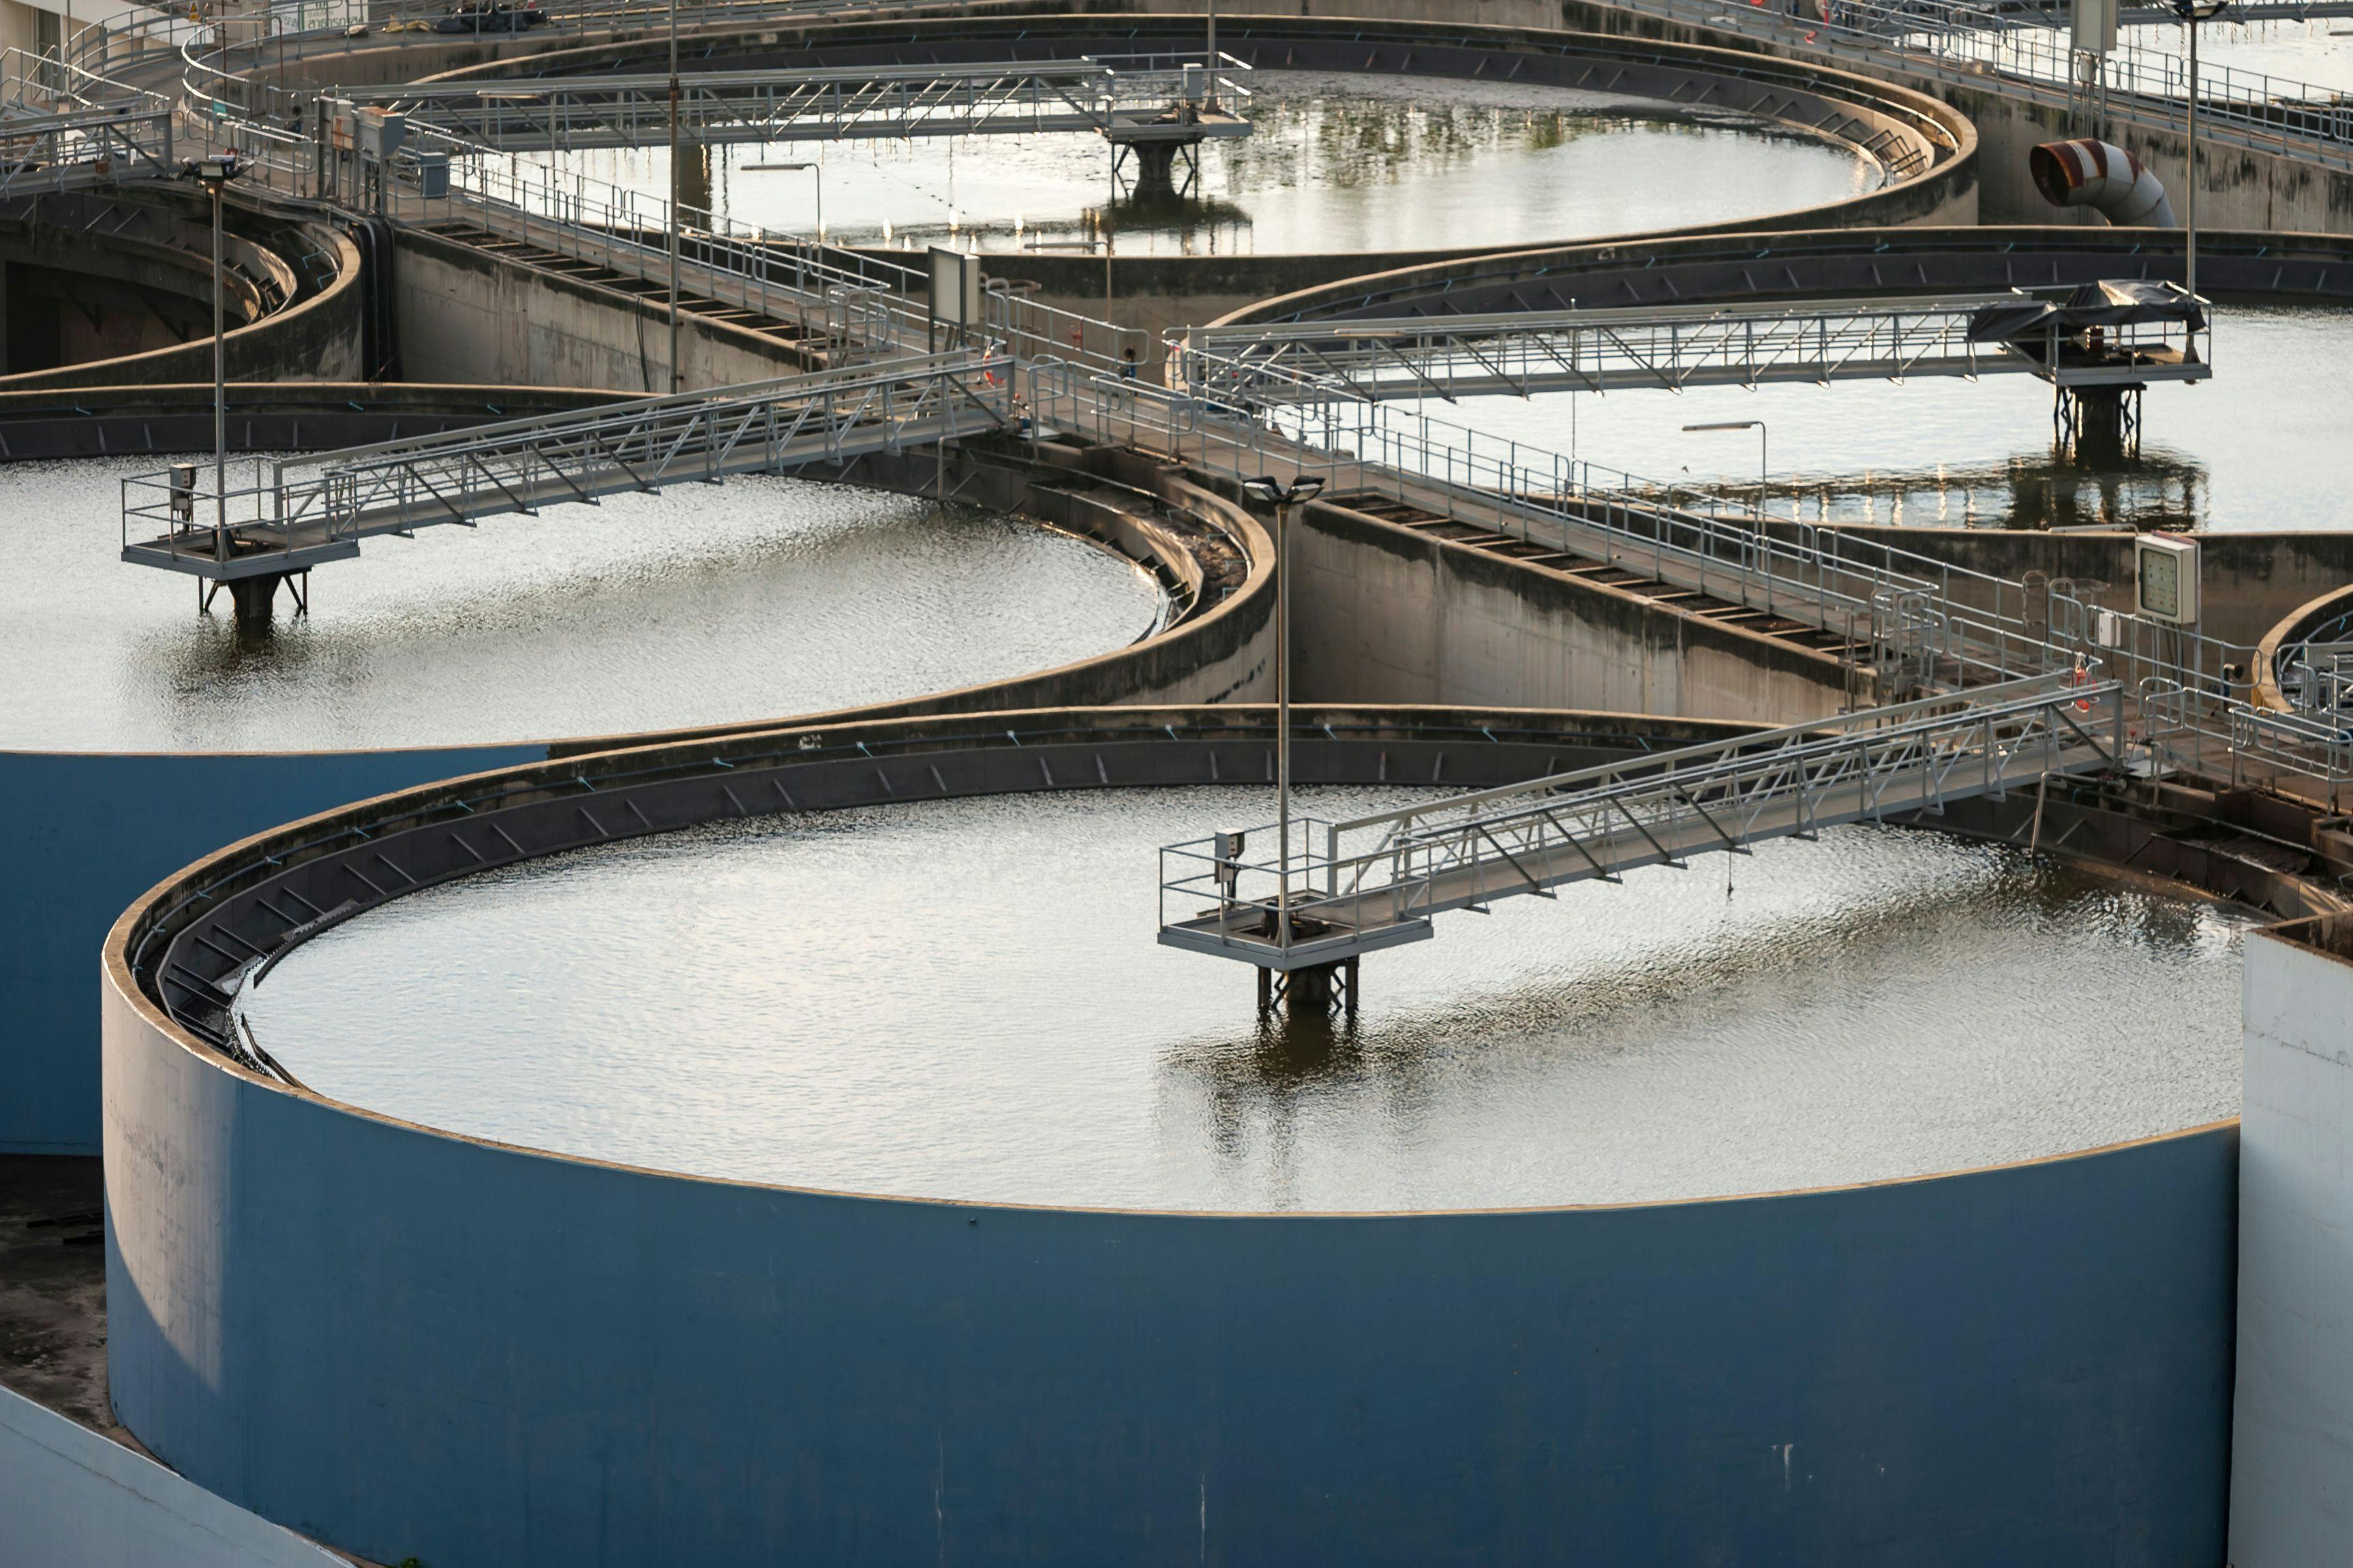 Modern urban wastewater treatment plant. Water purification is the process of removing undesirable chemicals, suspended solids and gases from contaminated water. Water cleaning facility outdoors. | Image Credit: © arhendrix - stock.adobe.com